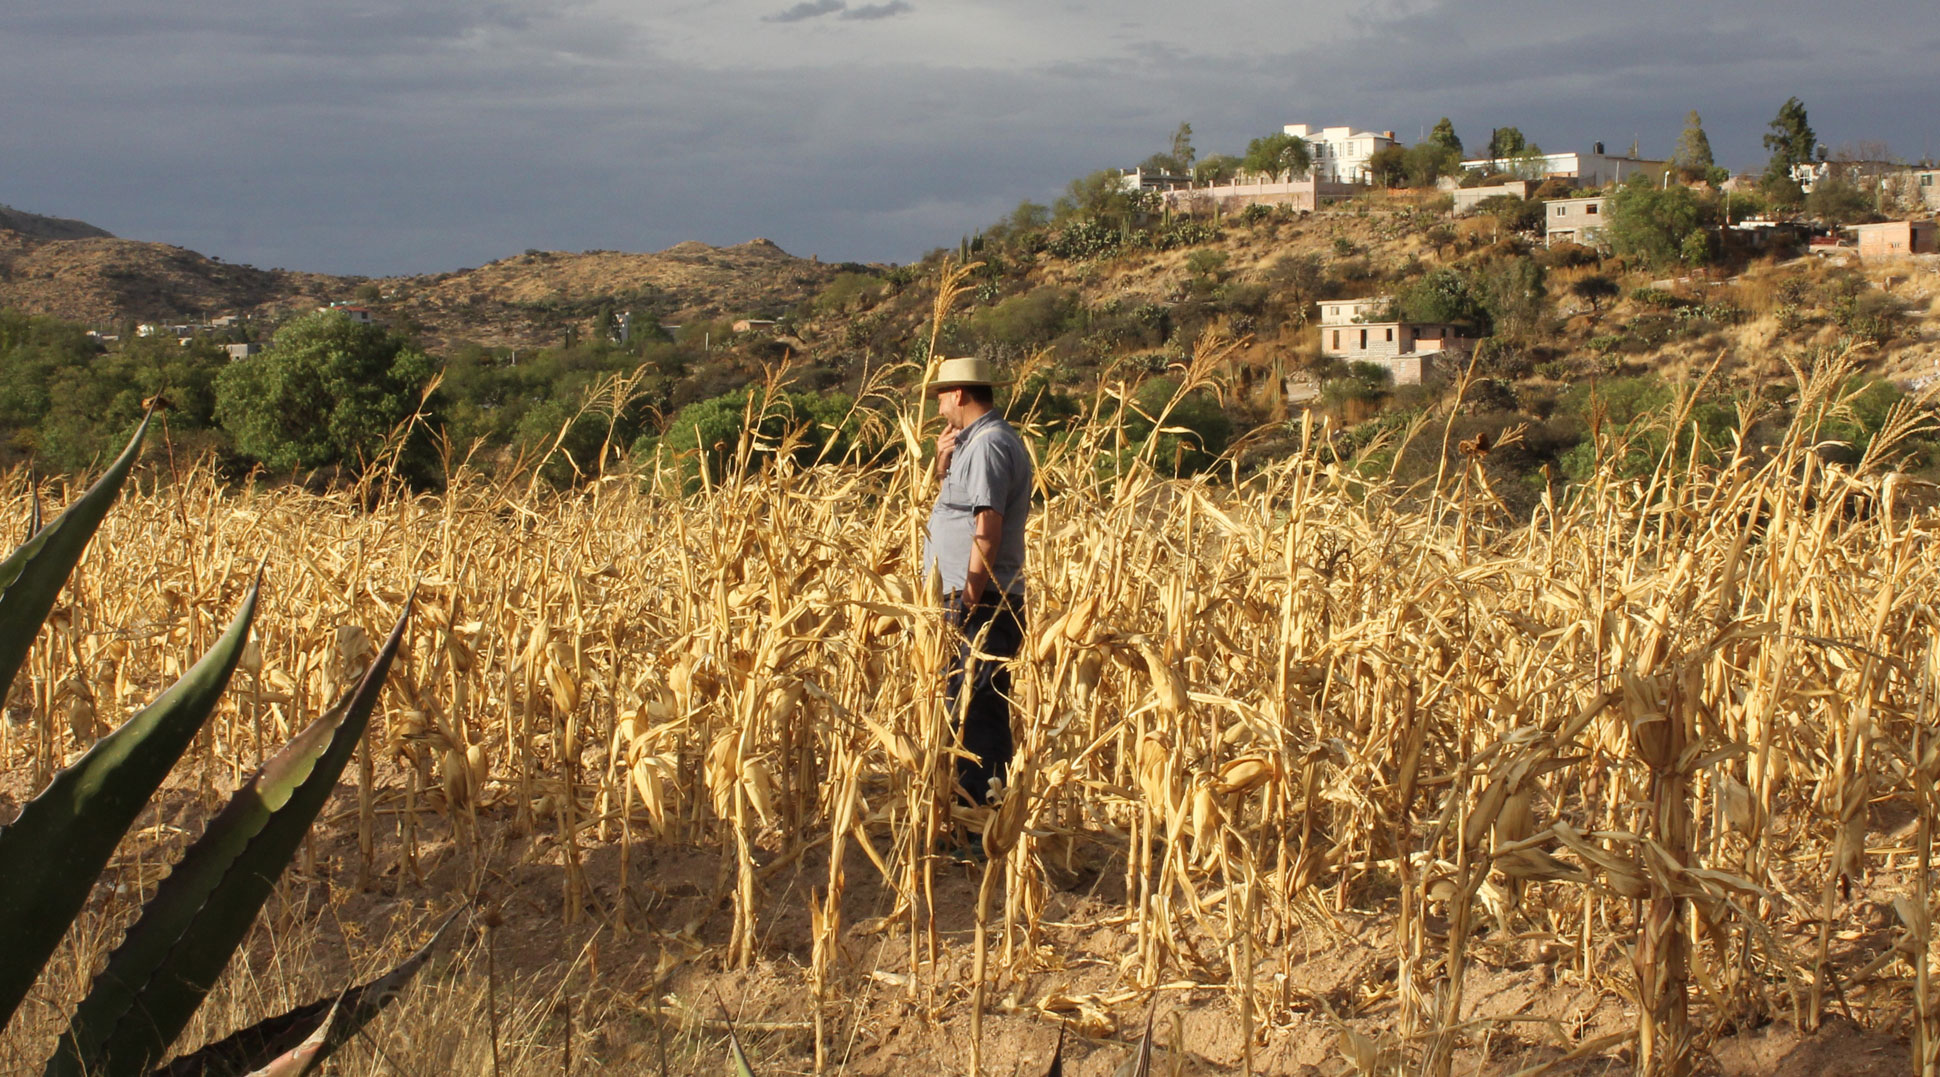 Man standing in a field of harvested corn in Mexico. The sky is grey and in the background is a small hill with three white buildings on.